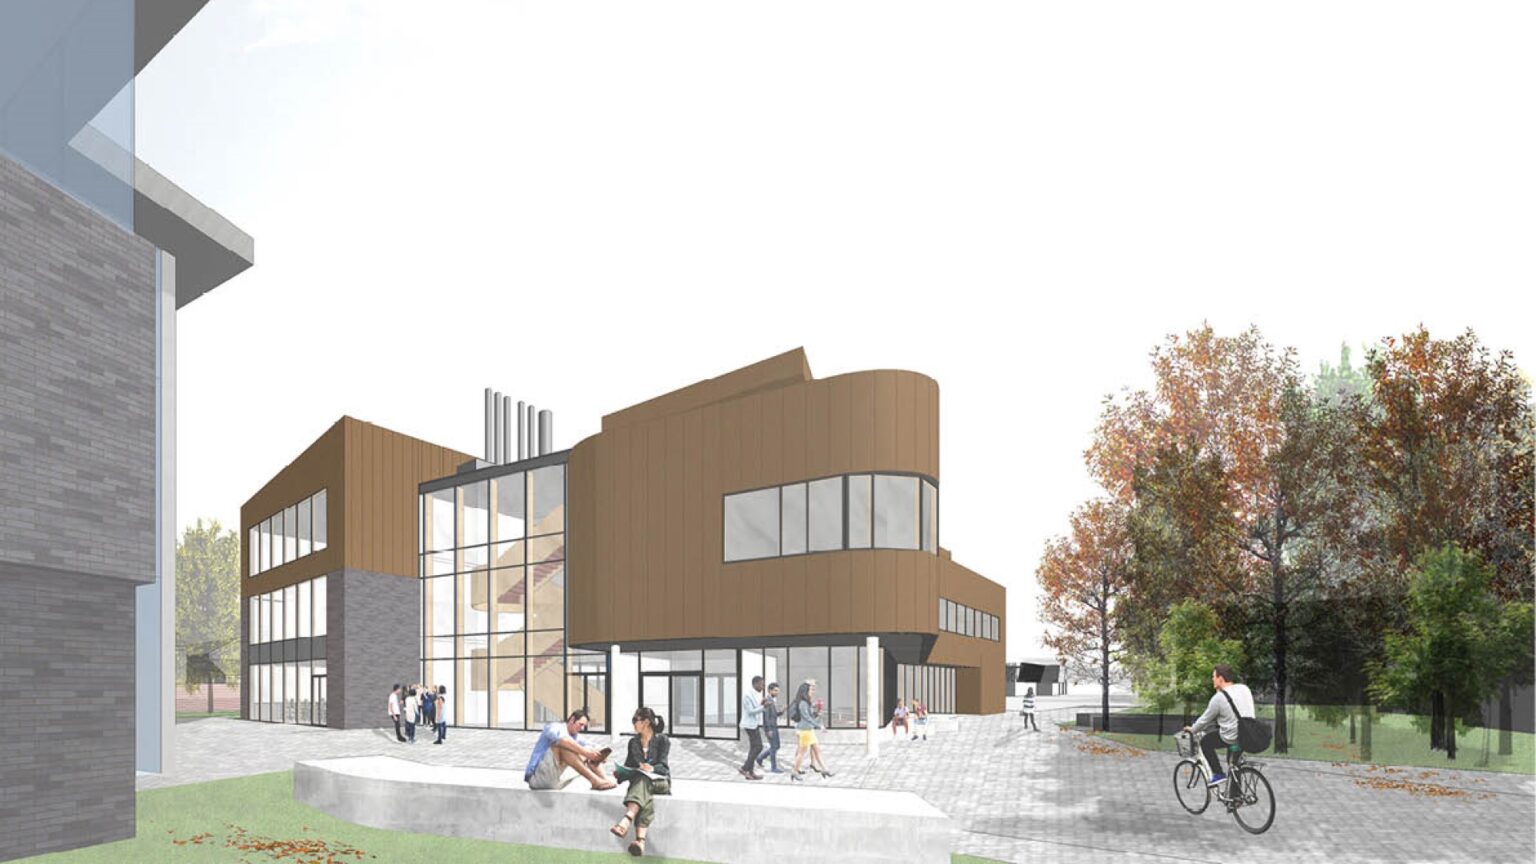 Edge Hill to build £17.4m Life Sciences facility